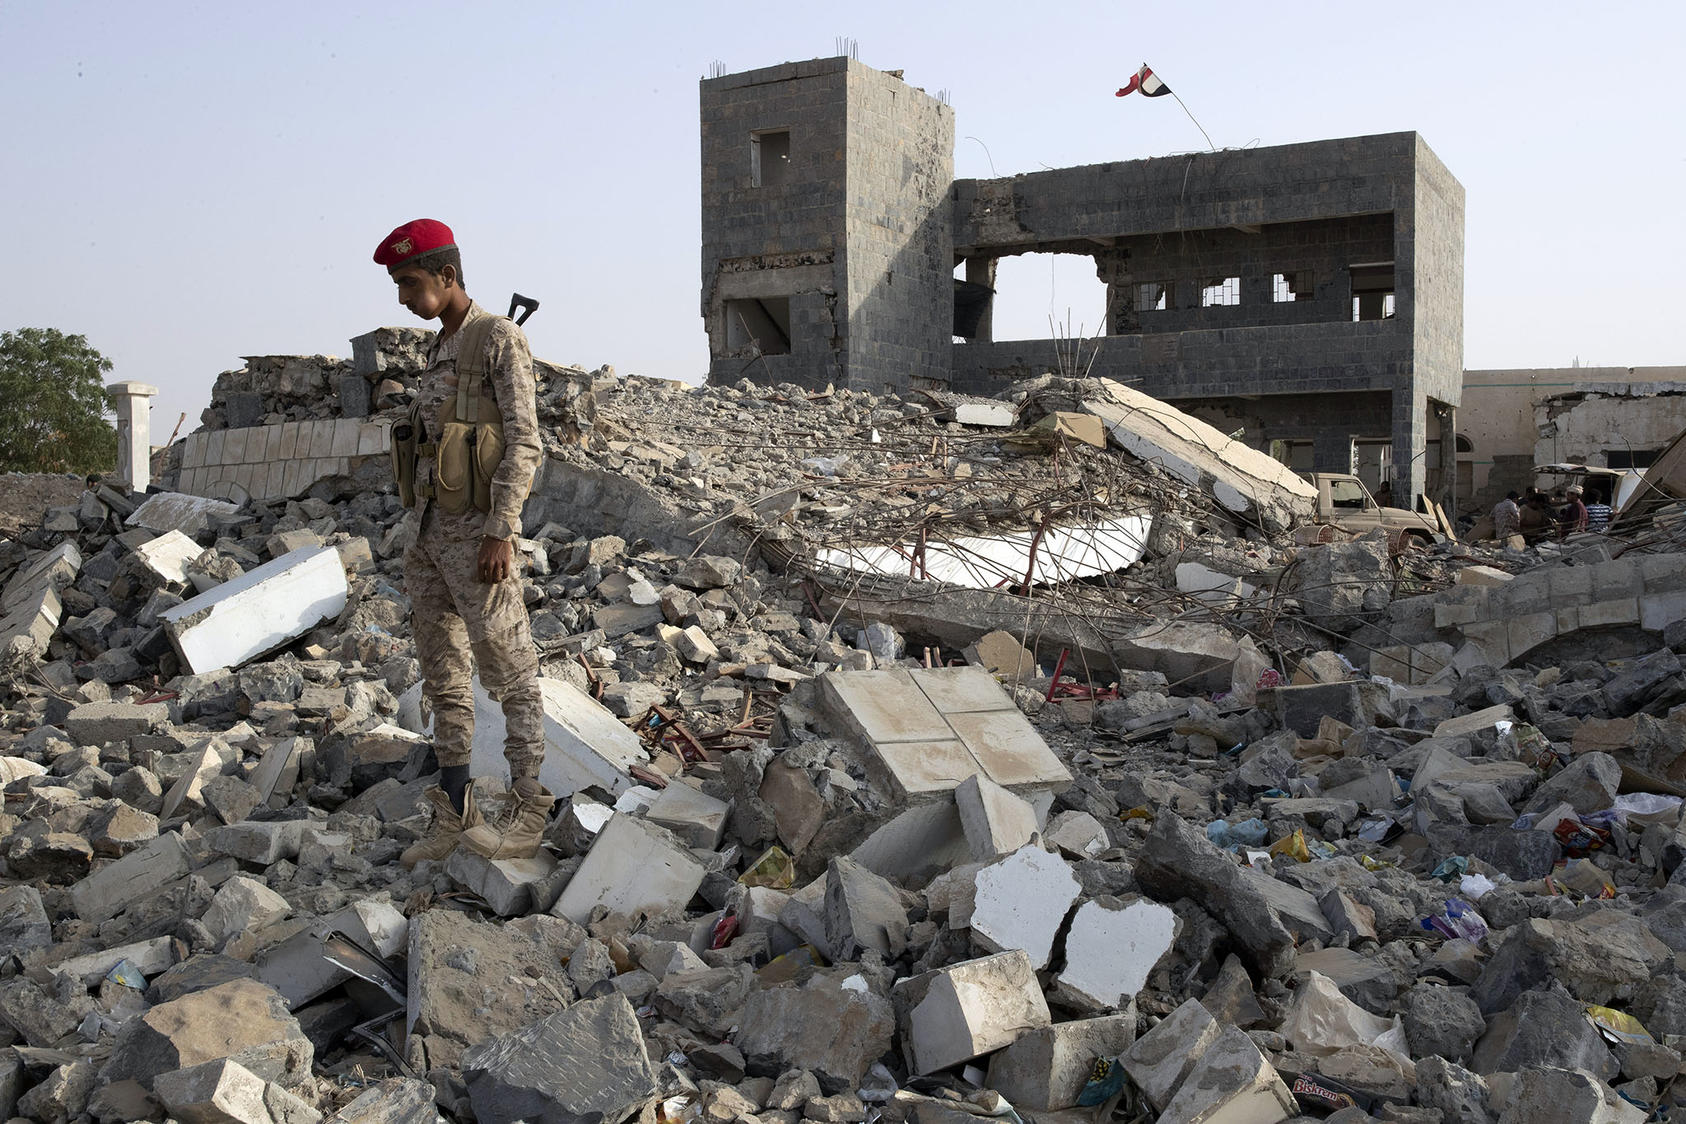 A Yemeni military policeman stands atop the rubble of a former school in the Hairan district of Yemen. January 21, 2019. (Tyler Hicks/The New York Times)